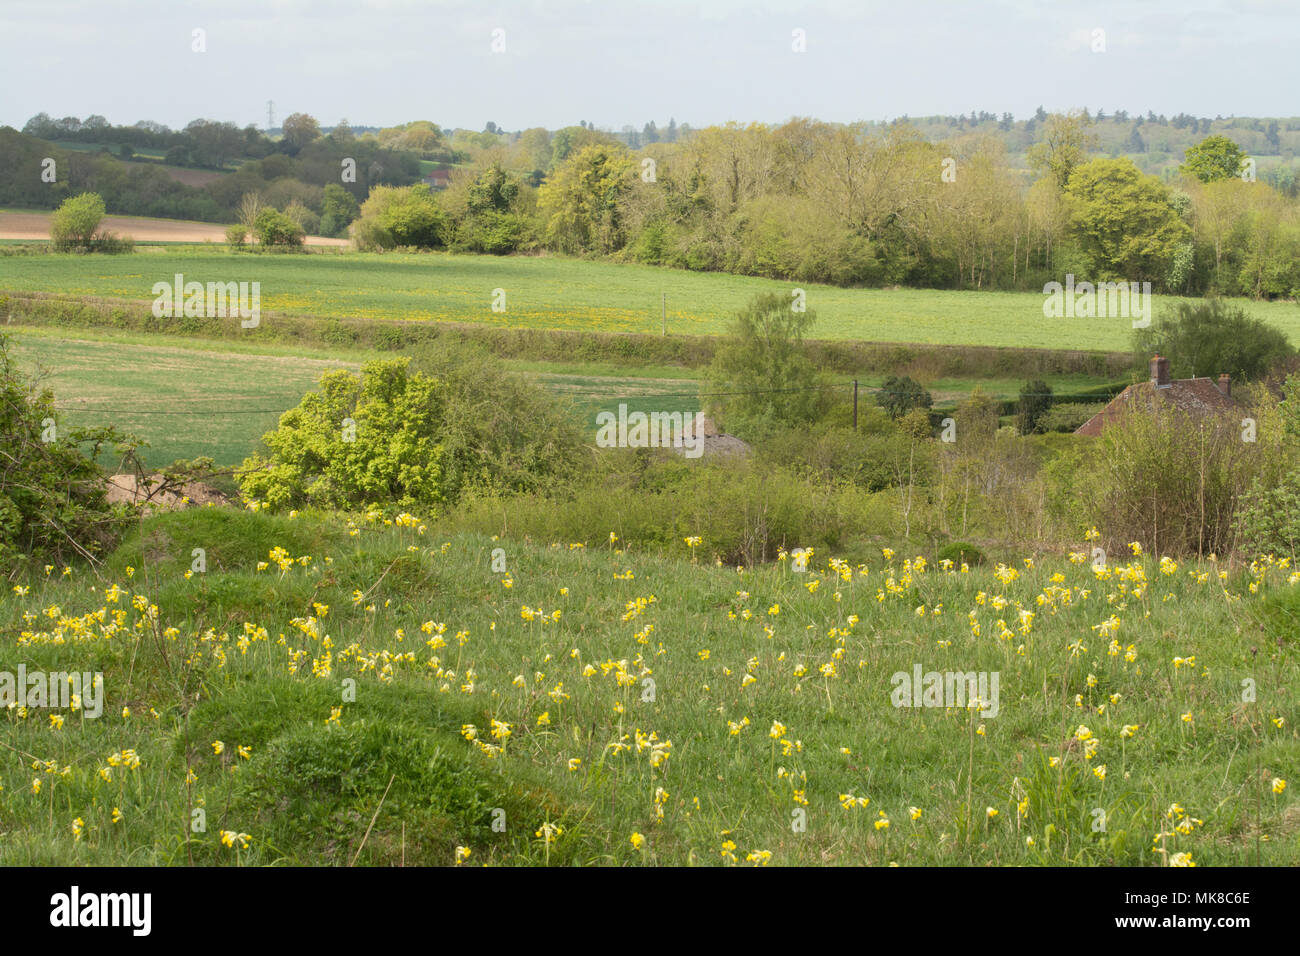 View of Noar Hill, a chalk downland site near Selborne, Hampshire, UK, with lots of flowering cowslips (Primula veris) Stock Photo